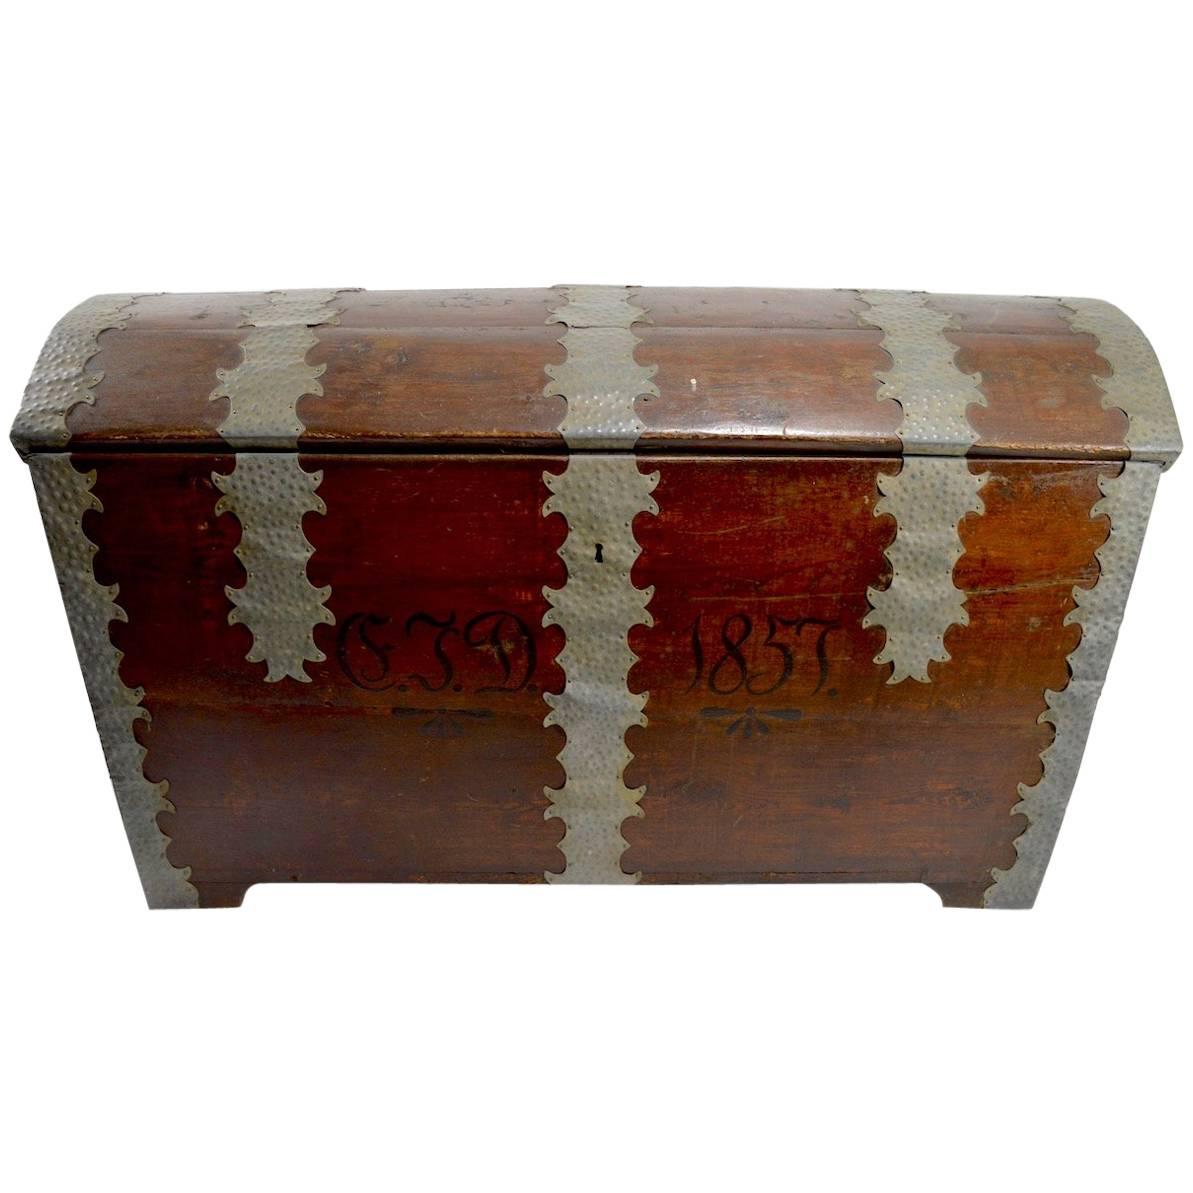 Large Dome Top Trunk, Dated 1857 For Sale